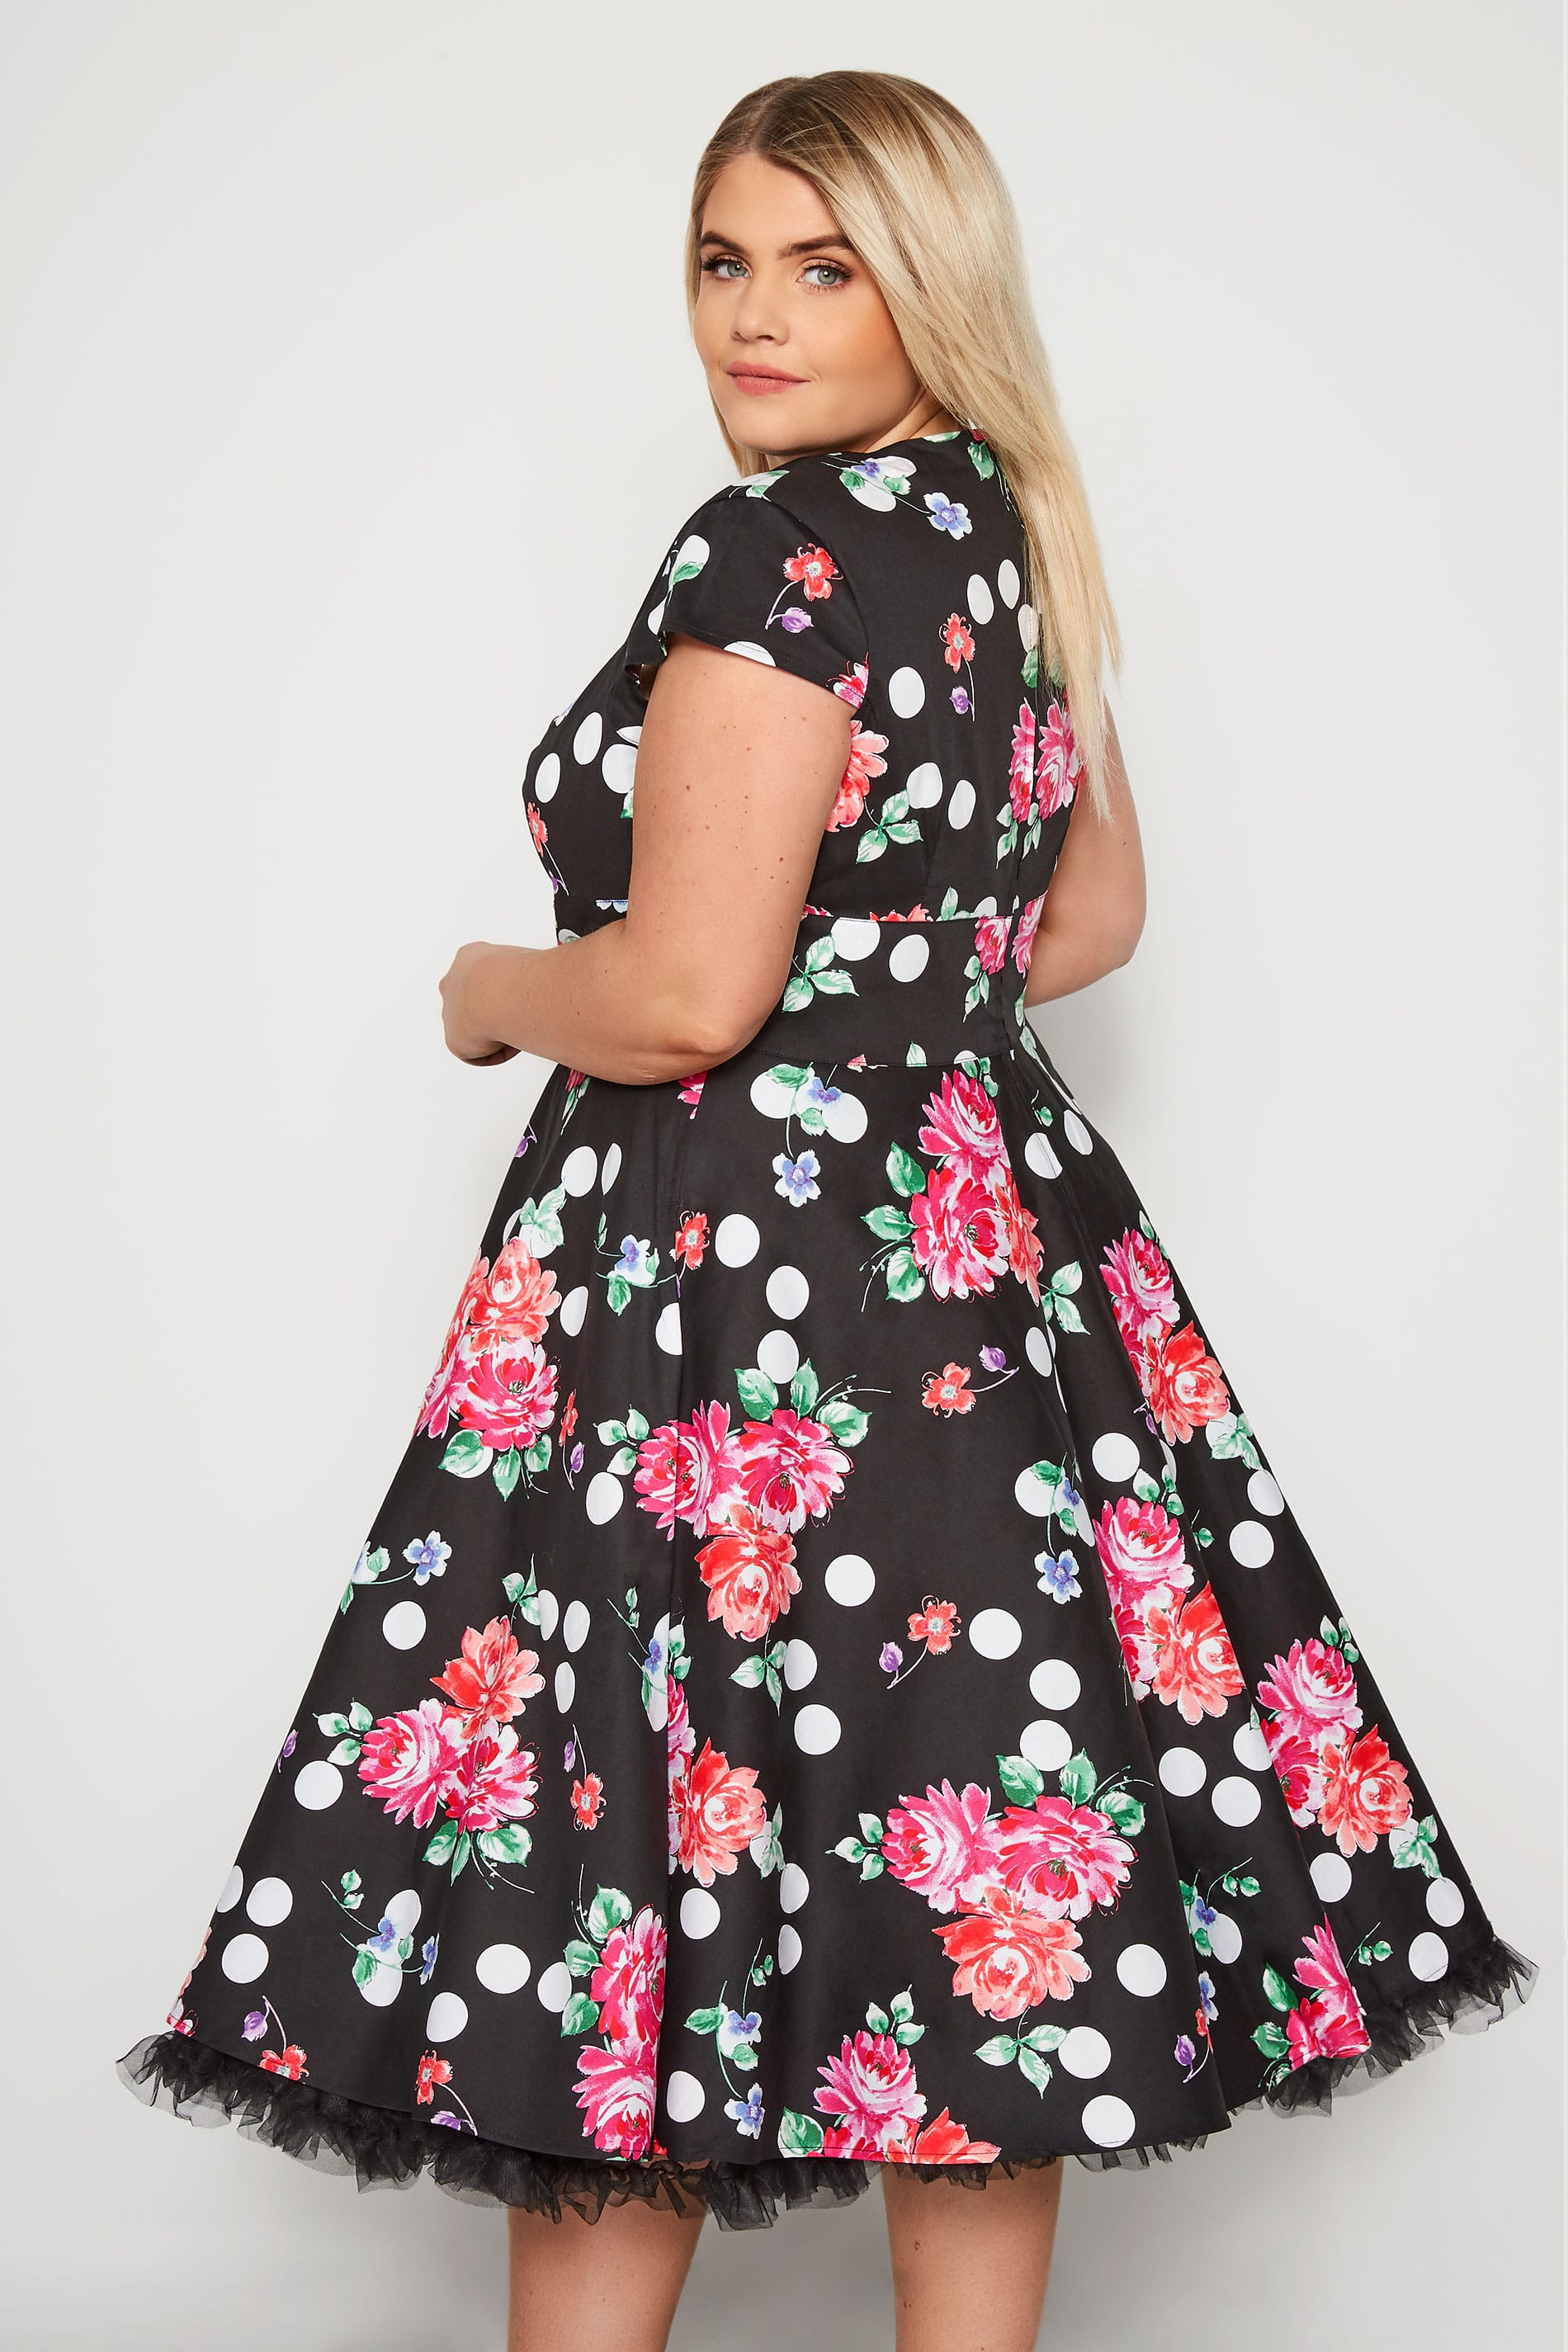 Plus Size HELL BUNNY Black Floral & Spot Carole Dress | Sizes 16 to 32 ...